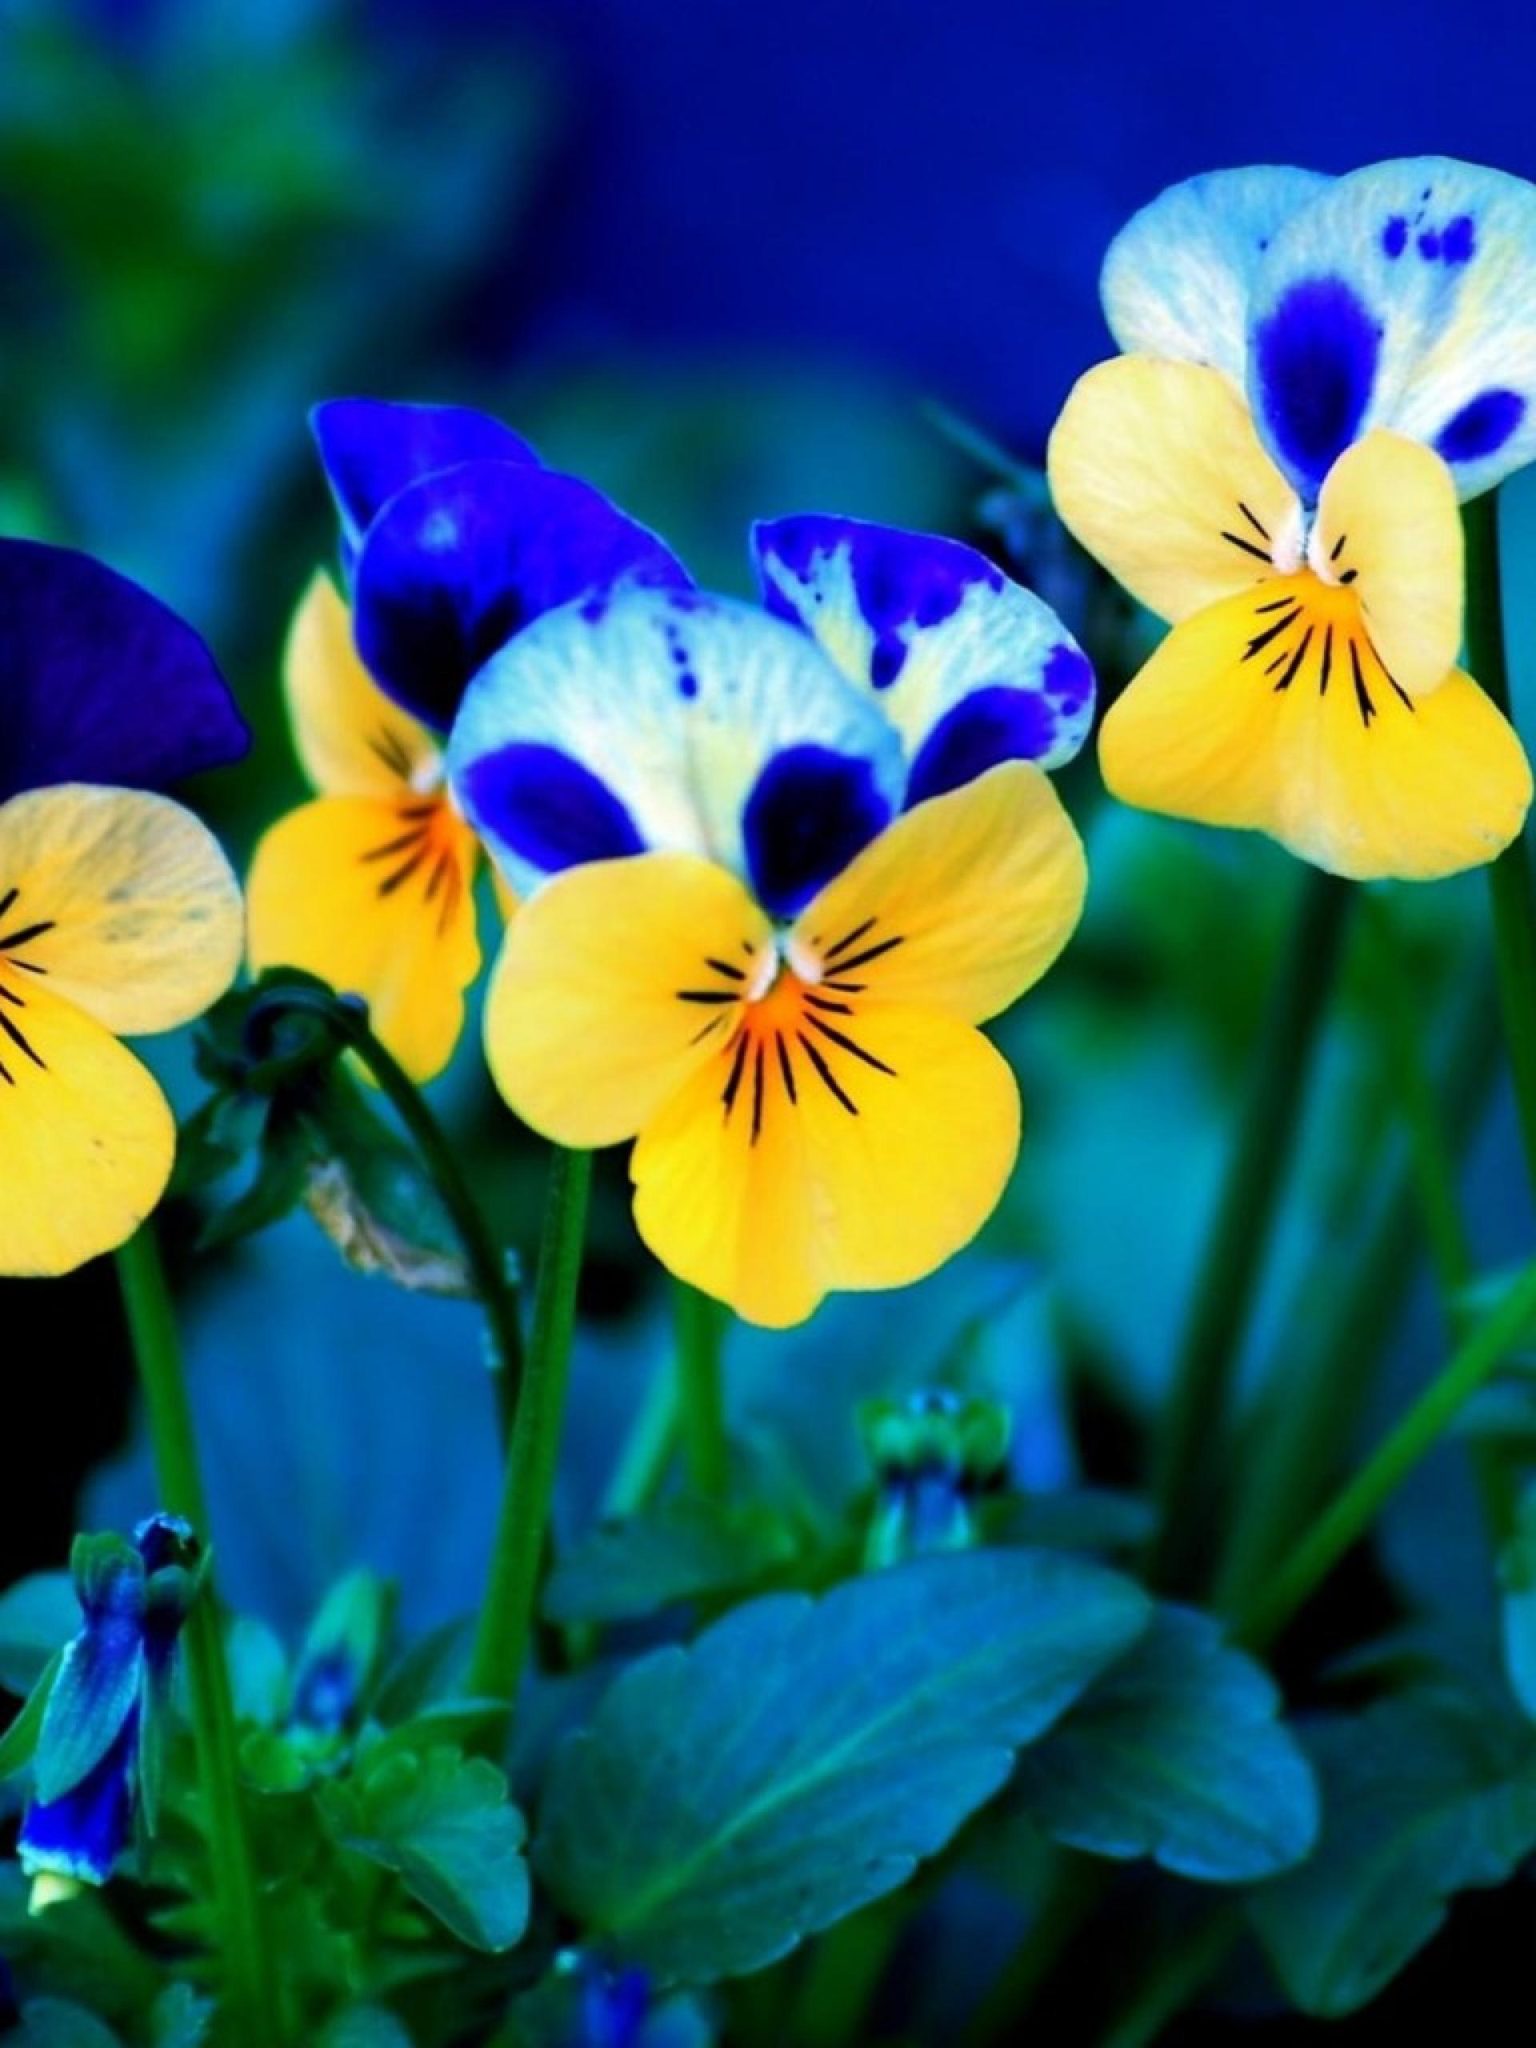 Pansies Beautiful Flowers Images 2017 HD Wallpapers Backgrounds Images